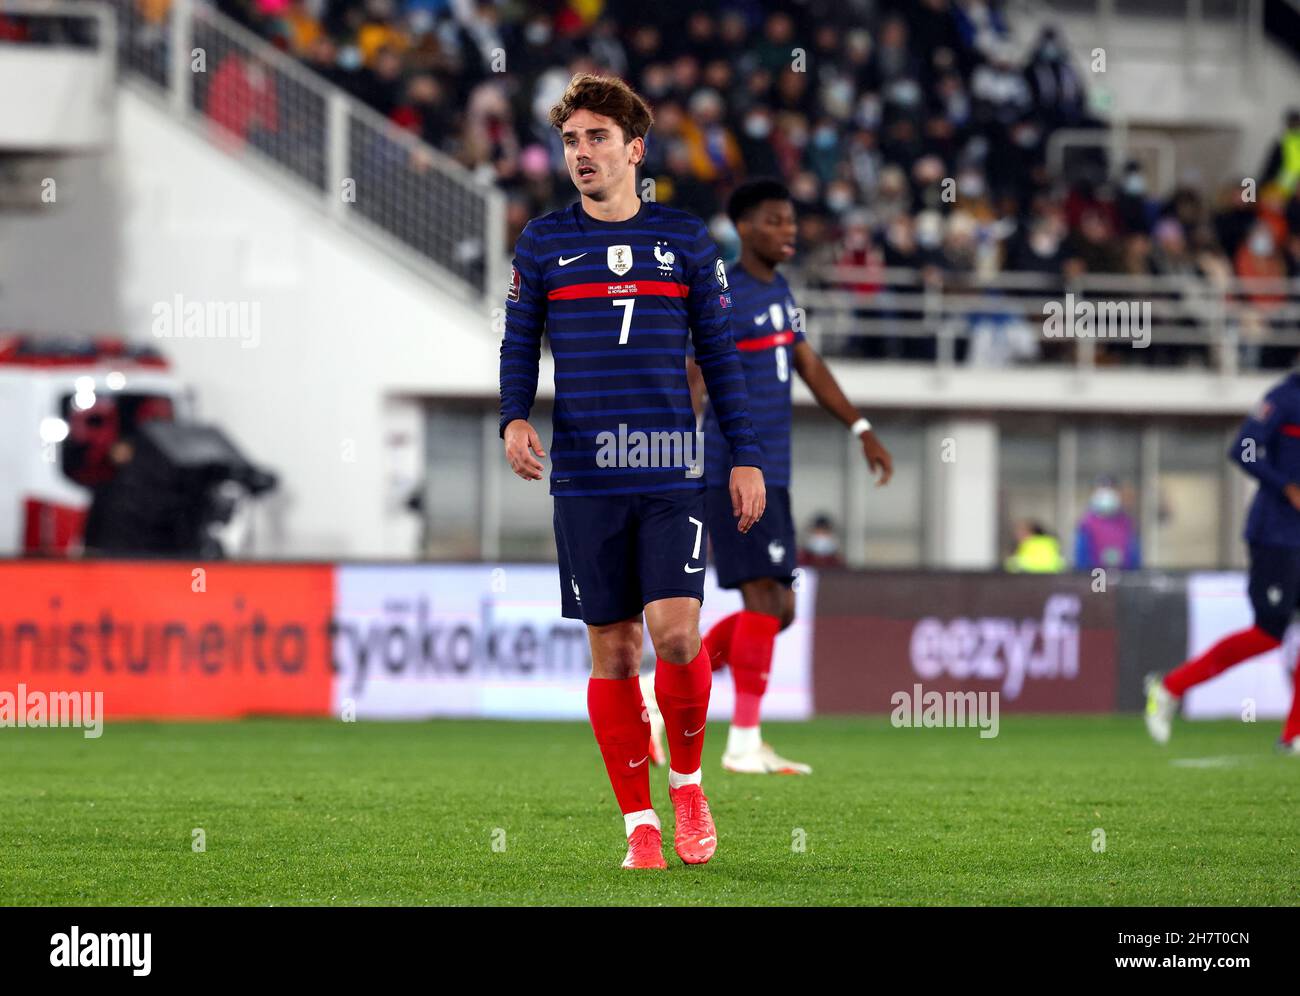 Finland 0-2 France in the 2022 Qatar World Cup European Qualifying Group D at the Olympic Stadium in Helsinki, Finland on November 16, 2021. Finland v France. Antoine Griezmann - France Stock Photo